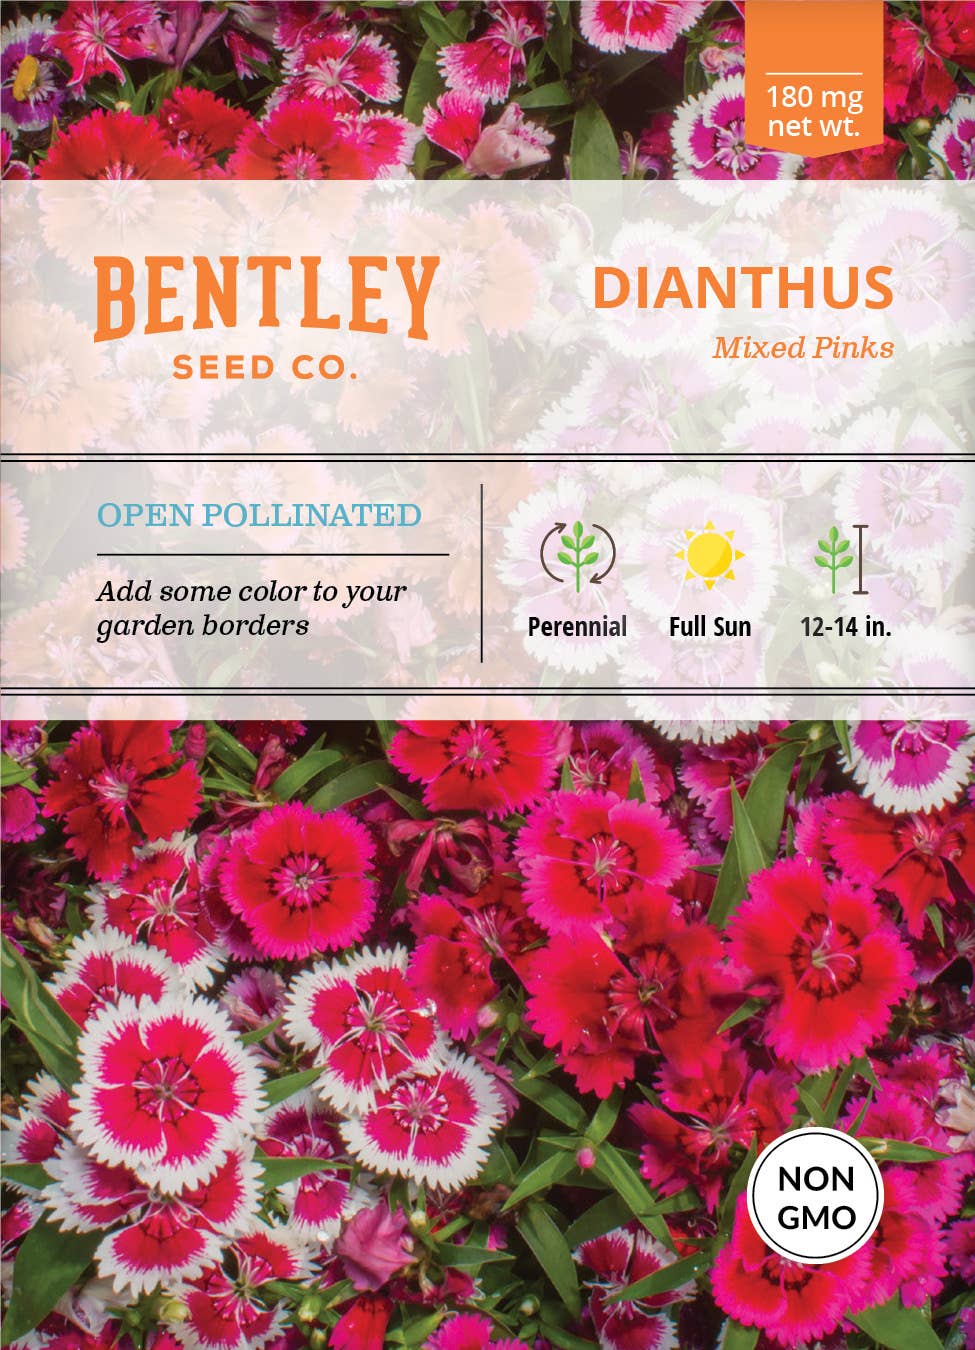 Bentley Seed Co. - Dianthus Mixed Colors Pinks